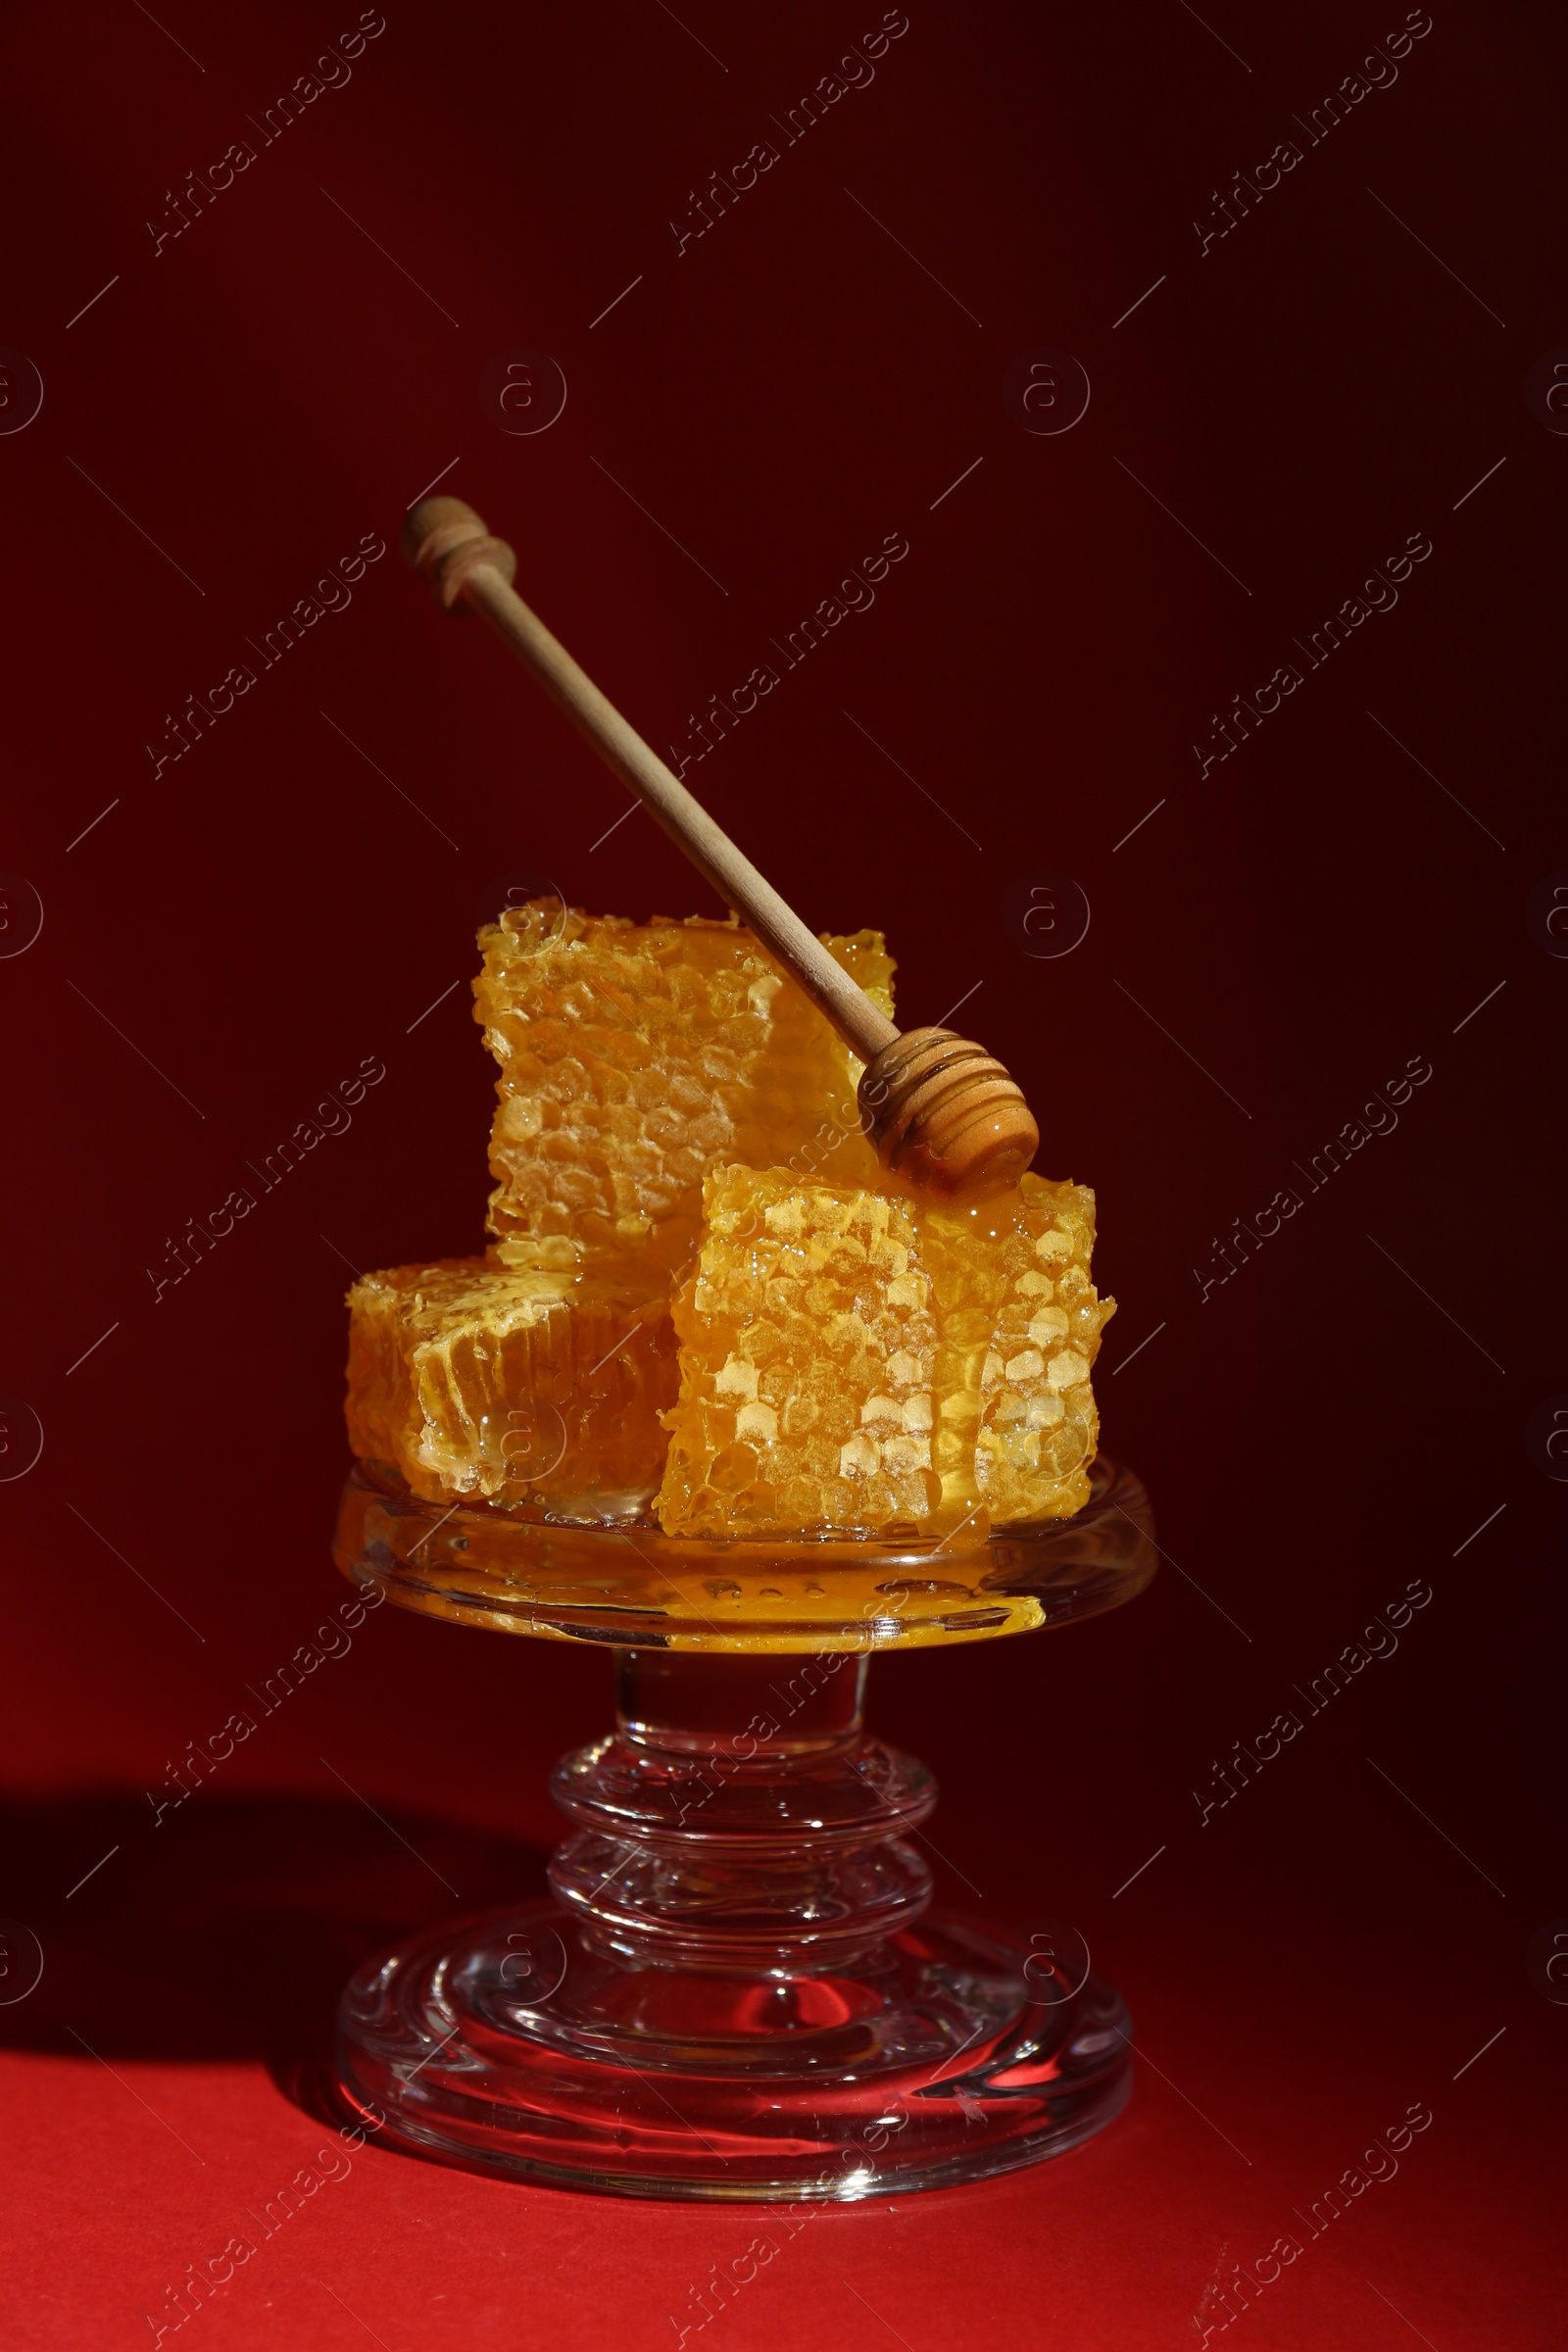 Photo of Natural honeycombs and wooden dipper on glass stand against burgundy background